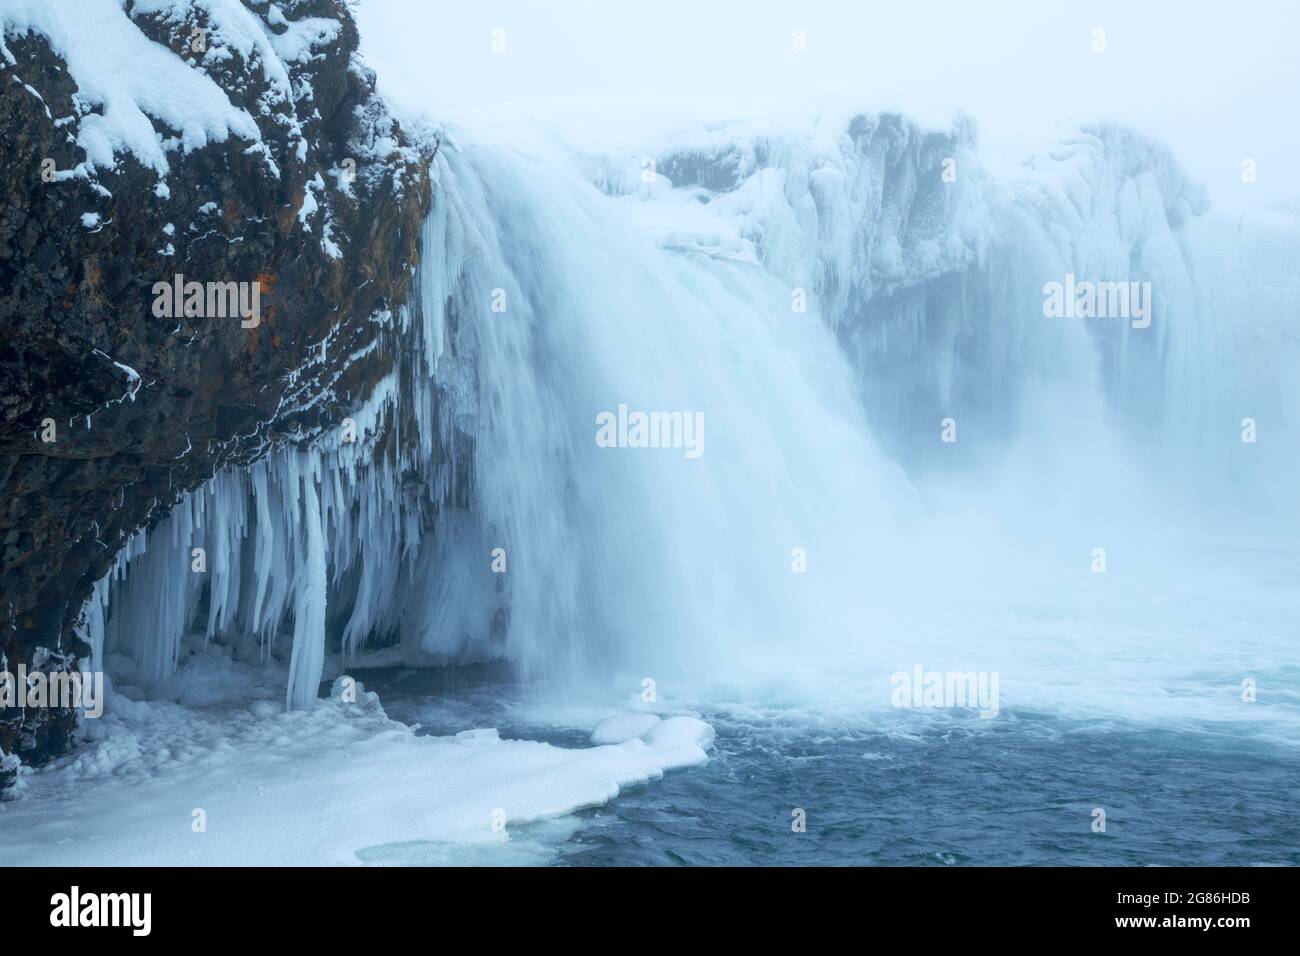 Goðafoss waterfall complex during winter conditions showing the 12 metre drop full of ice features on the  river Skjálfandafljót in Iceland Stock Photo